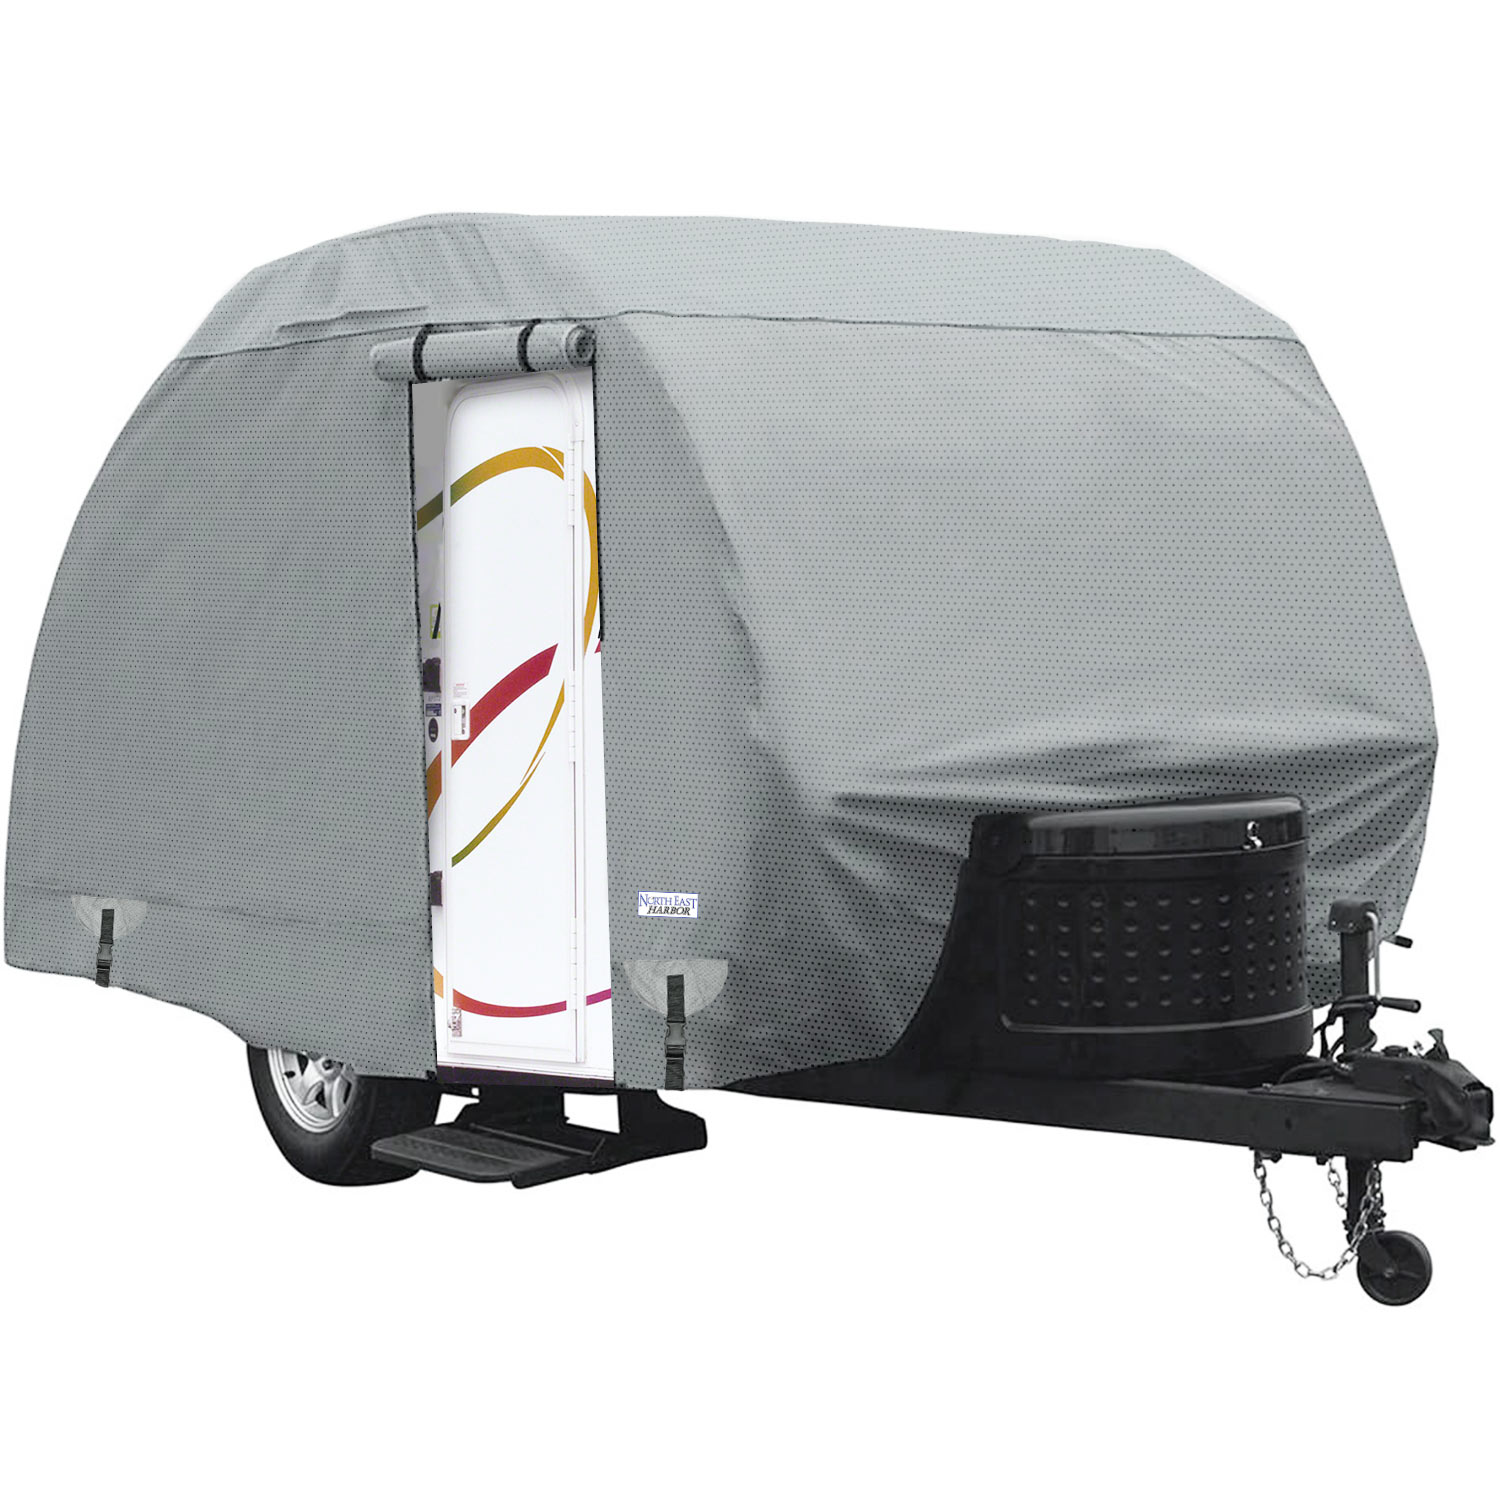 NEH Waterproof Superior Teardrop R-Pod Travel Trailer Storage Cover Fits Up  To 19' Long and 6' Wide Trailers Direct Fitment for Forest River R-Pod  Model RP-171, RP-172, RP-176, RP-176T, and RP-177